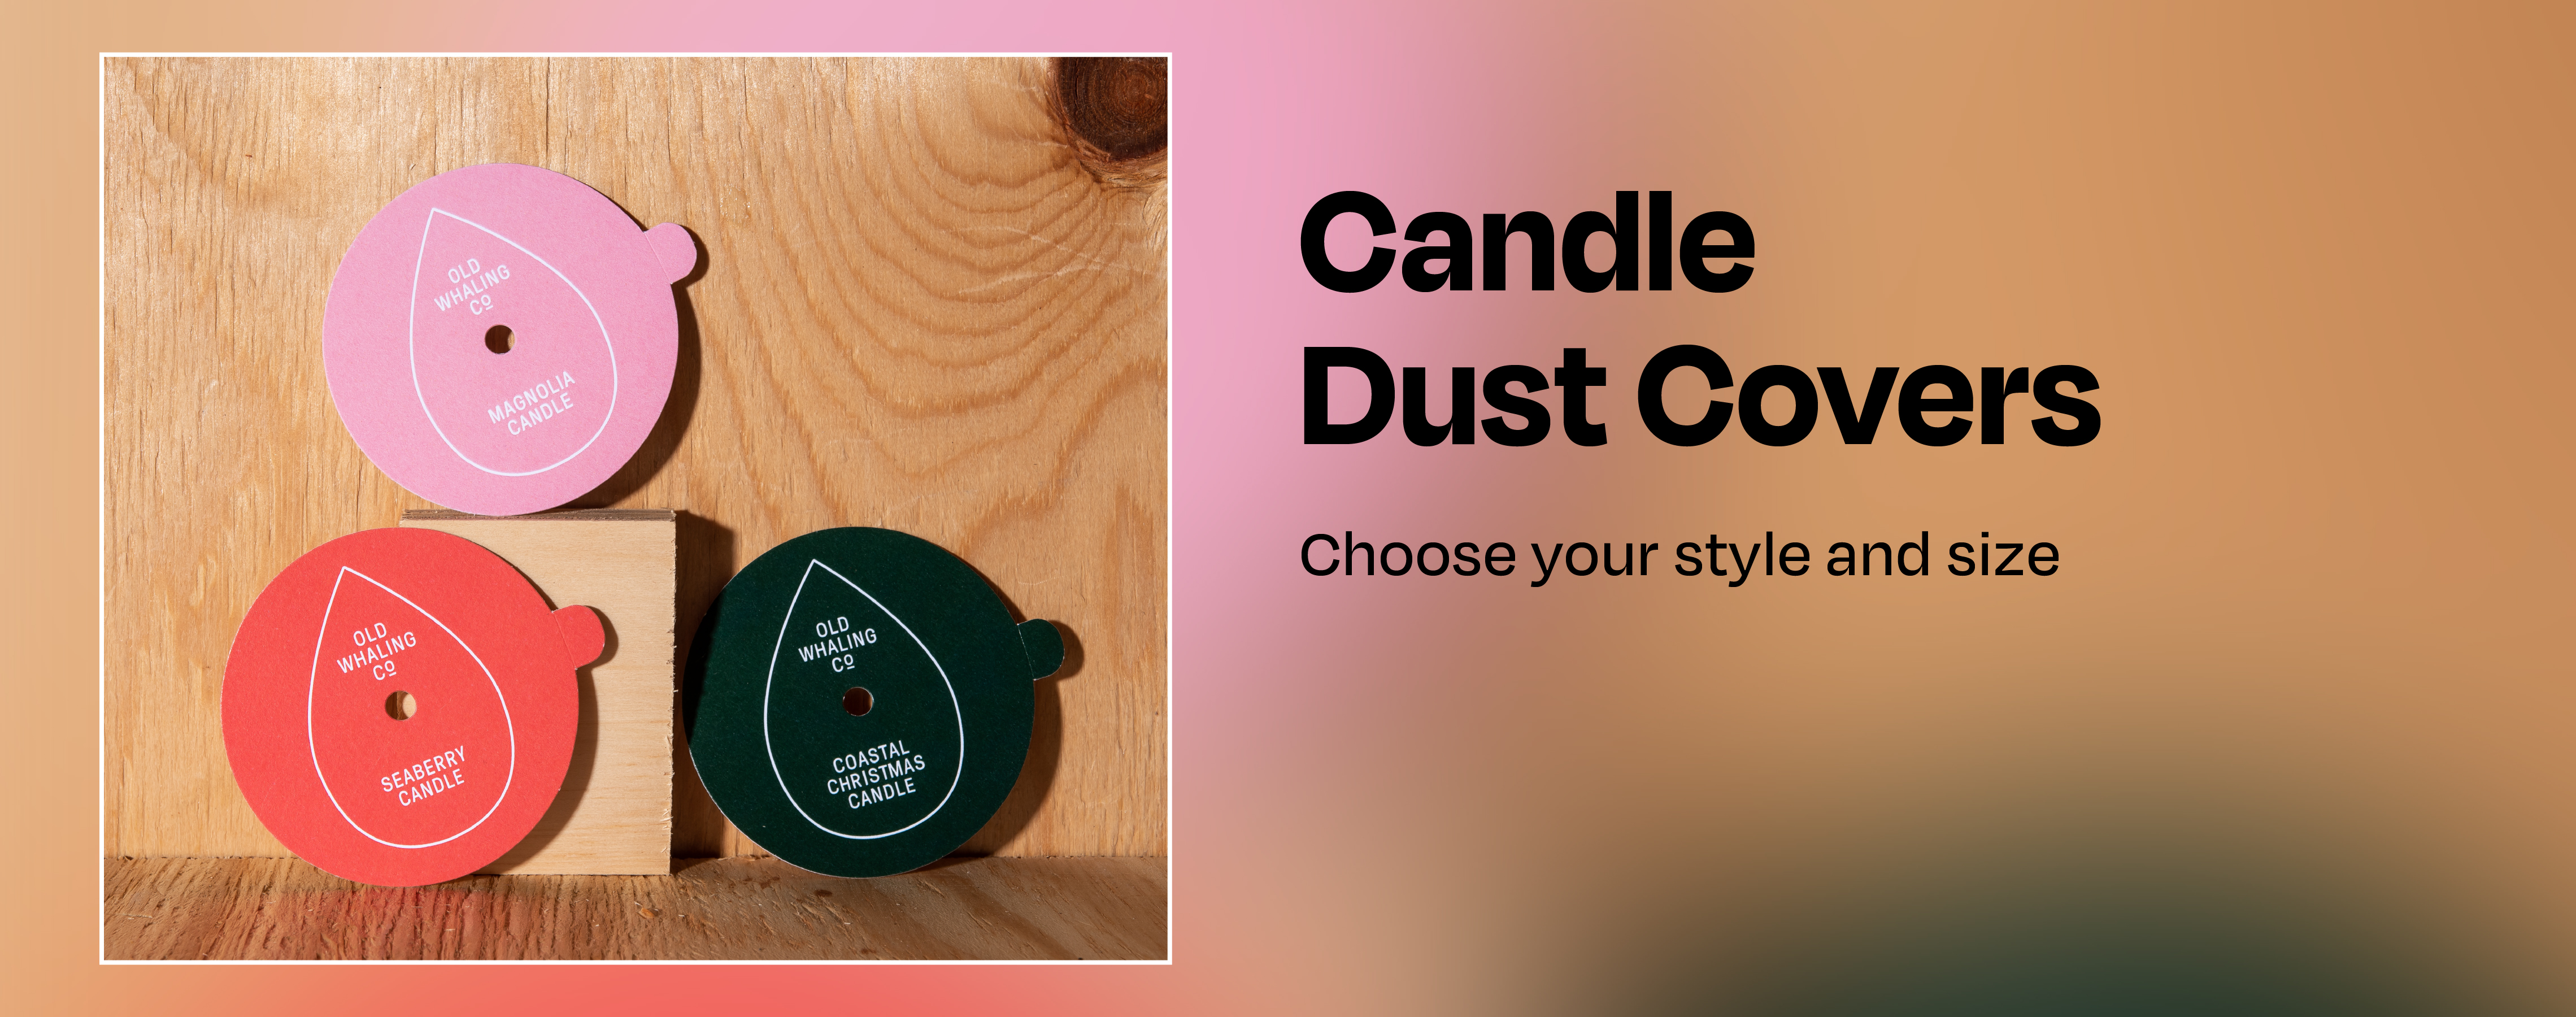 Candle Dust Covers, choose your style and size